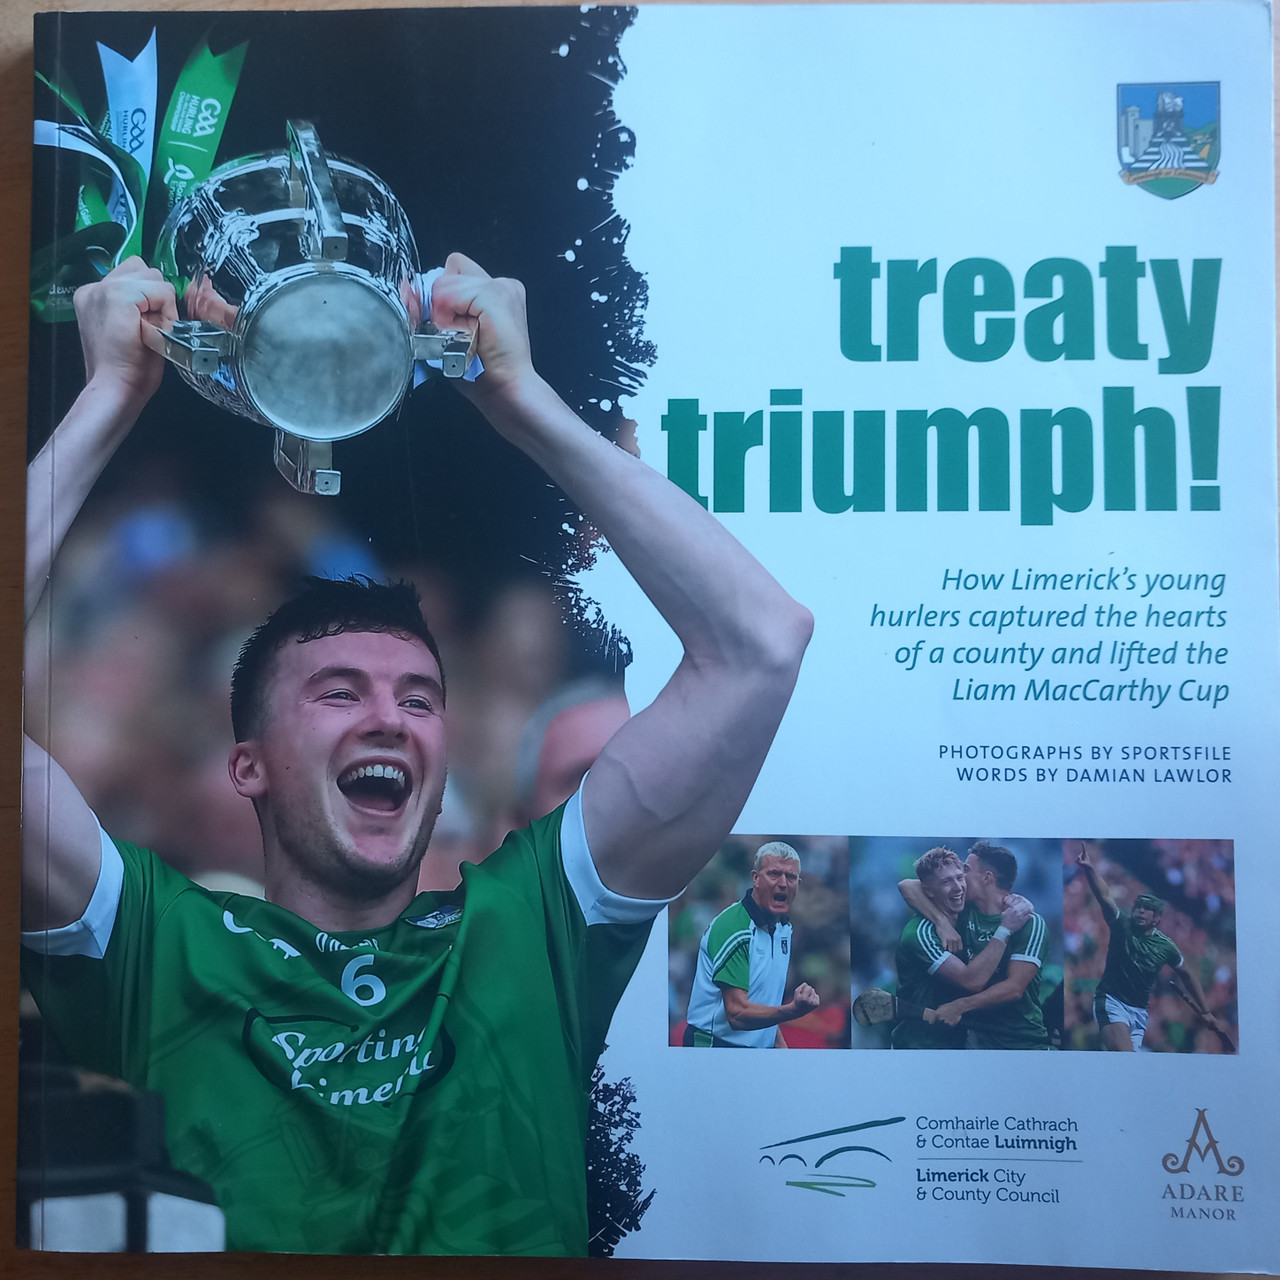 Sportsfile & Damian Lawlor - Treaty Triumph - How Limerick's Young Hurlers Lifted the Liam MacCarthy Cup 2018 - PB